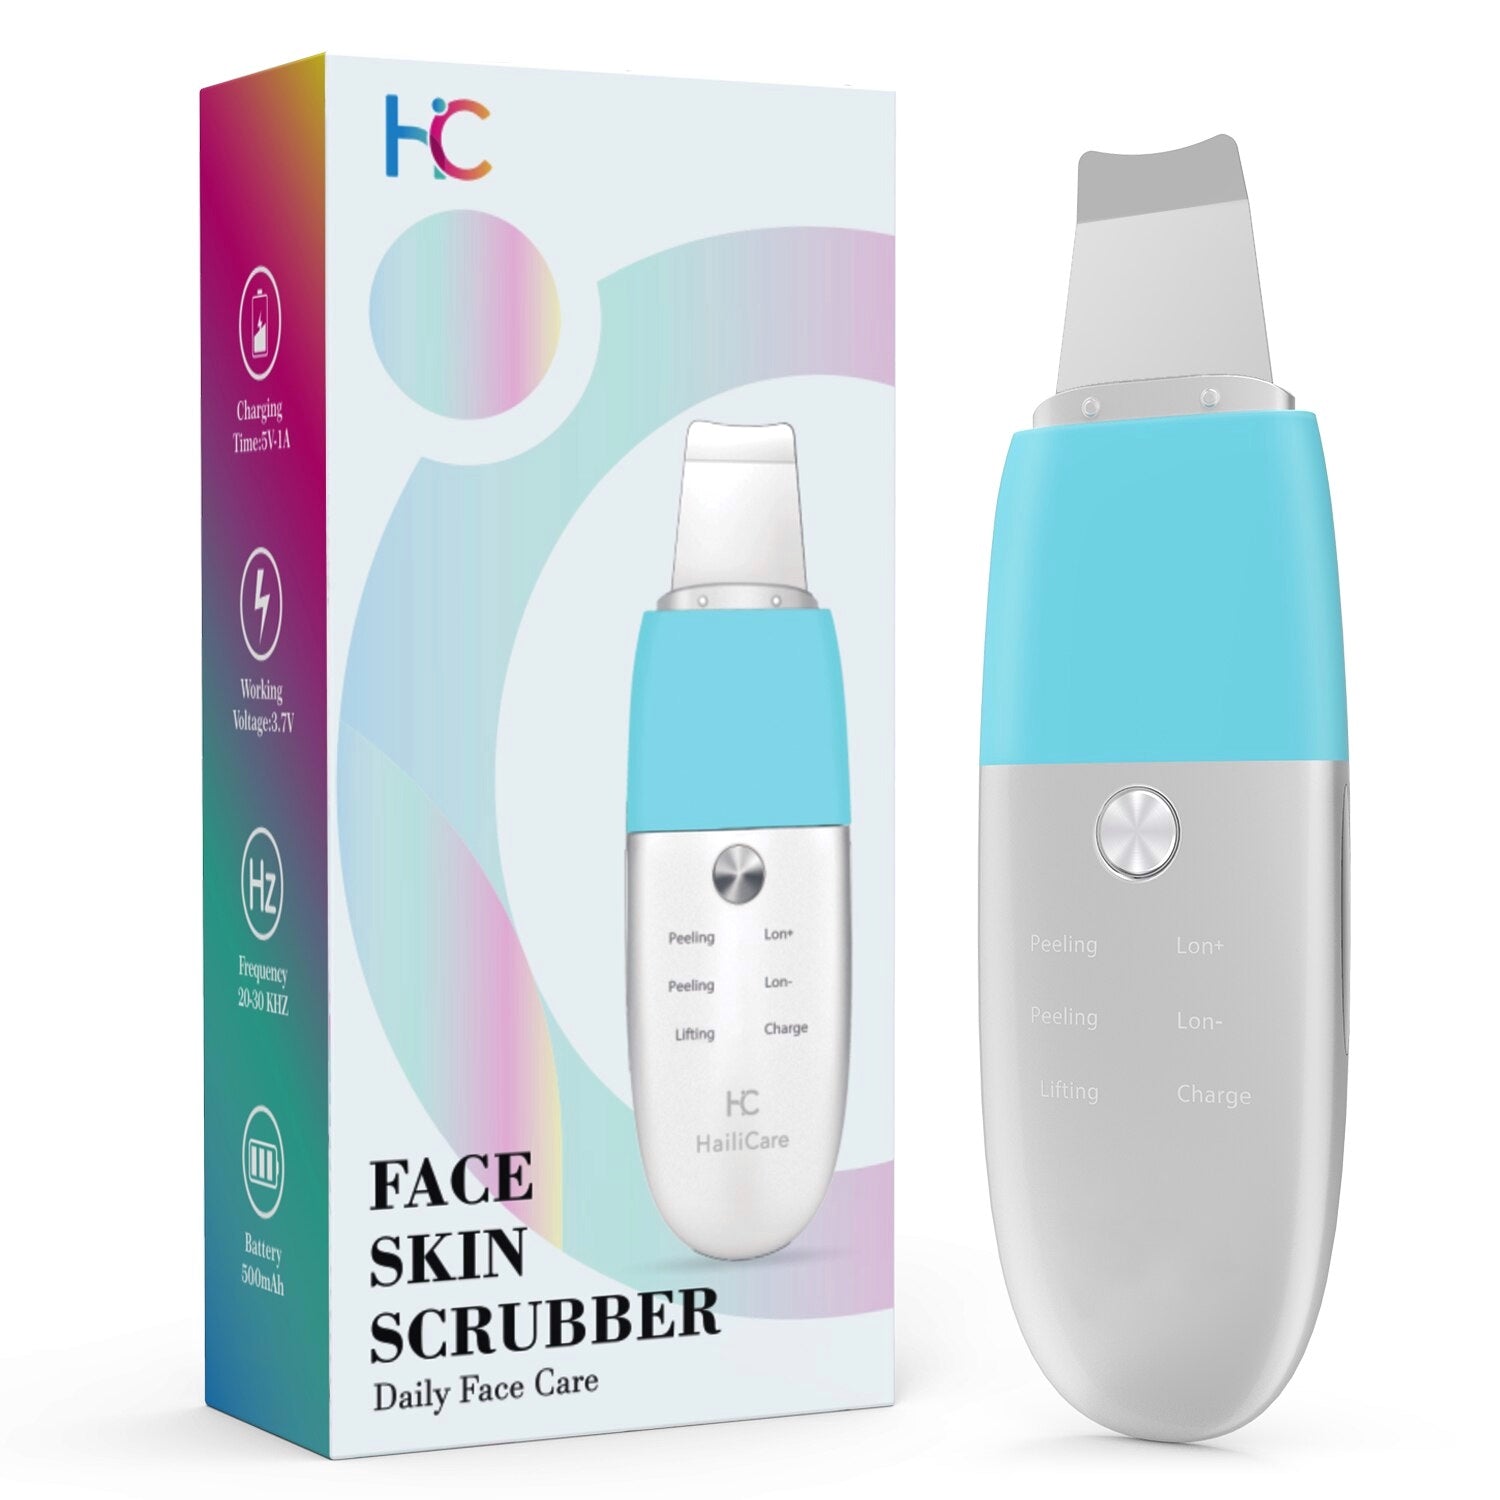 What Is The Best Ultrasonic Skin Scrubber